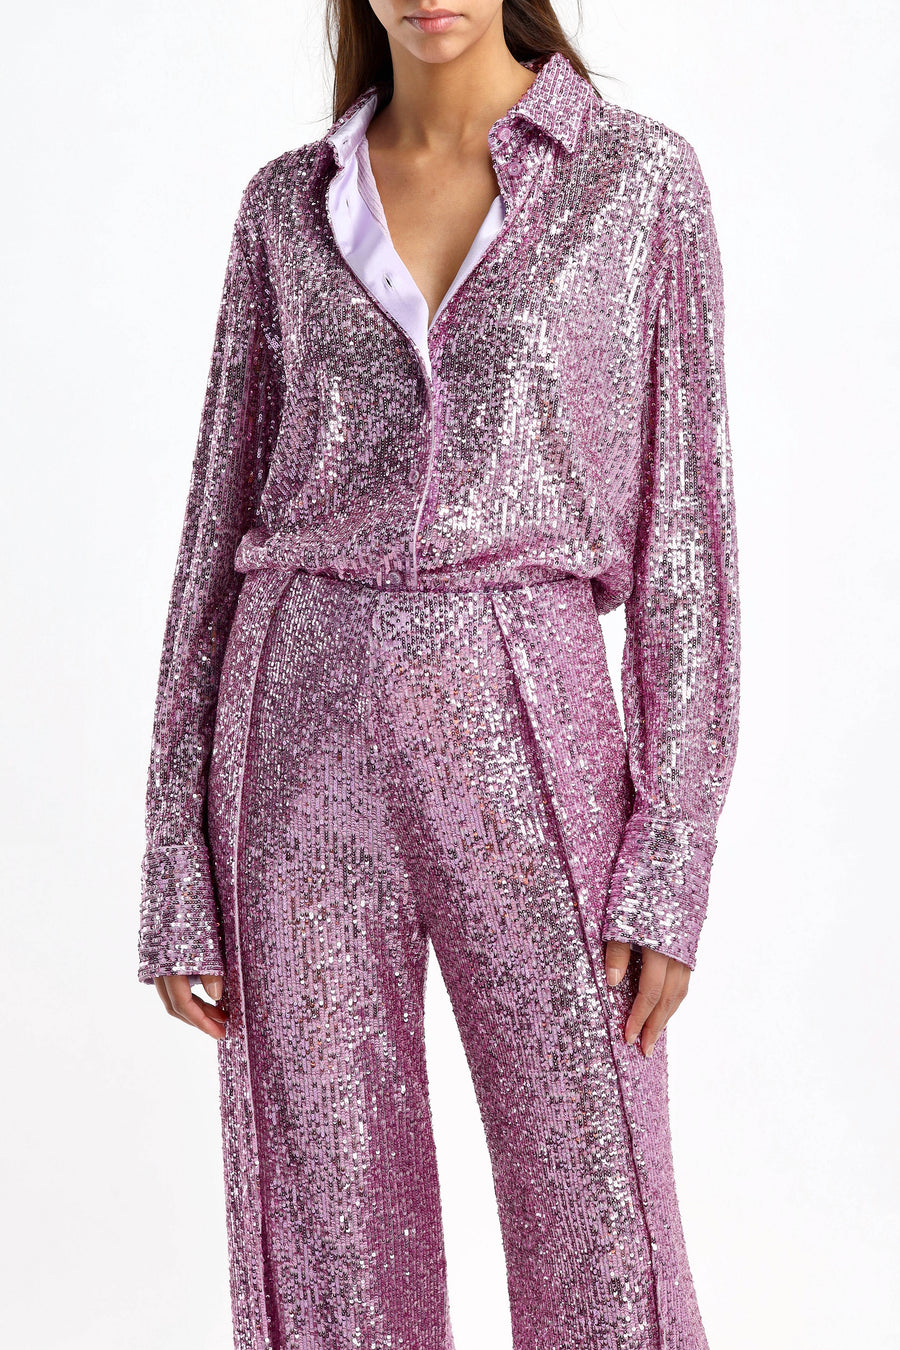 Bluse All Over Sequins in LilacTom Ford - Anita Hass